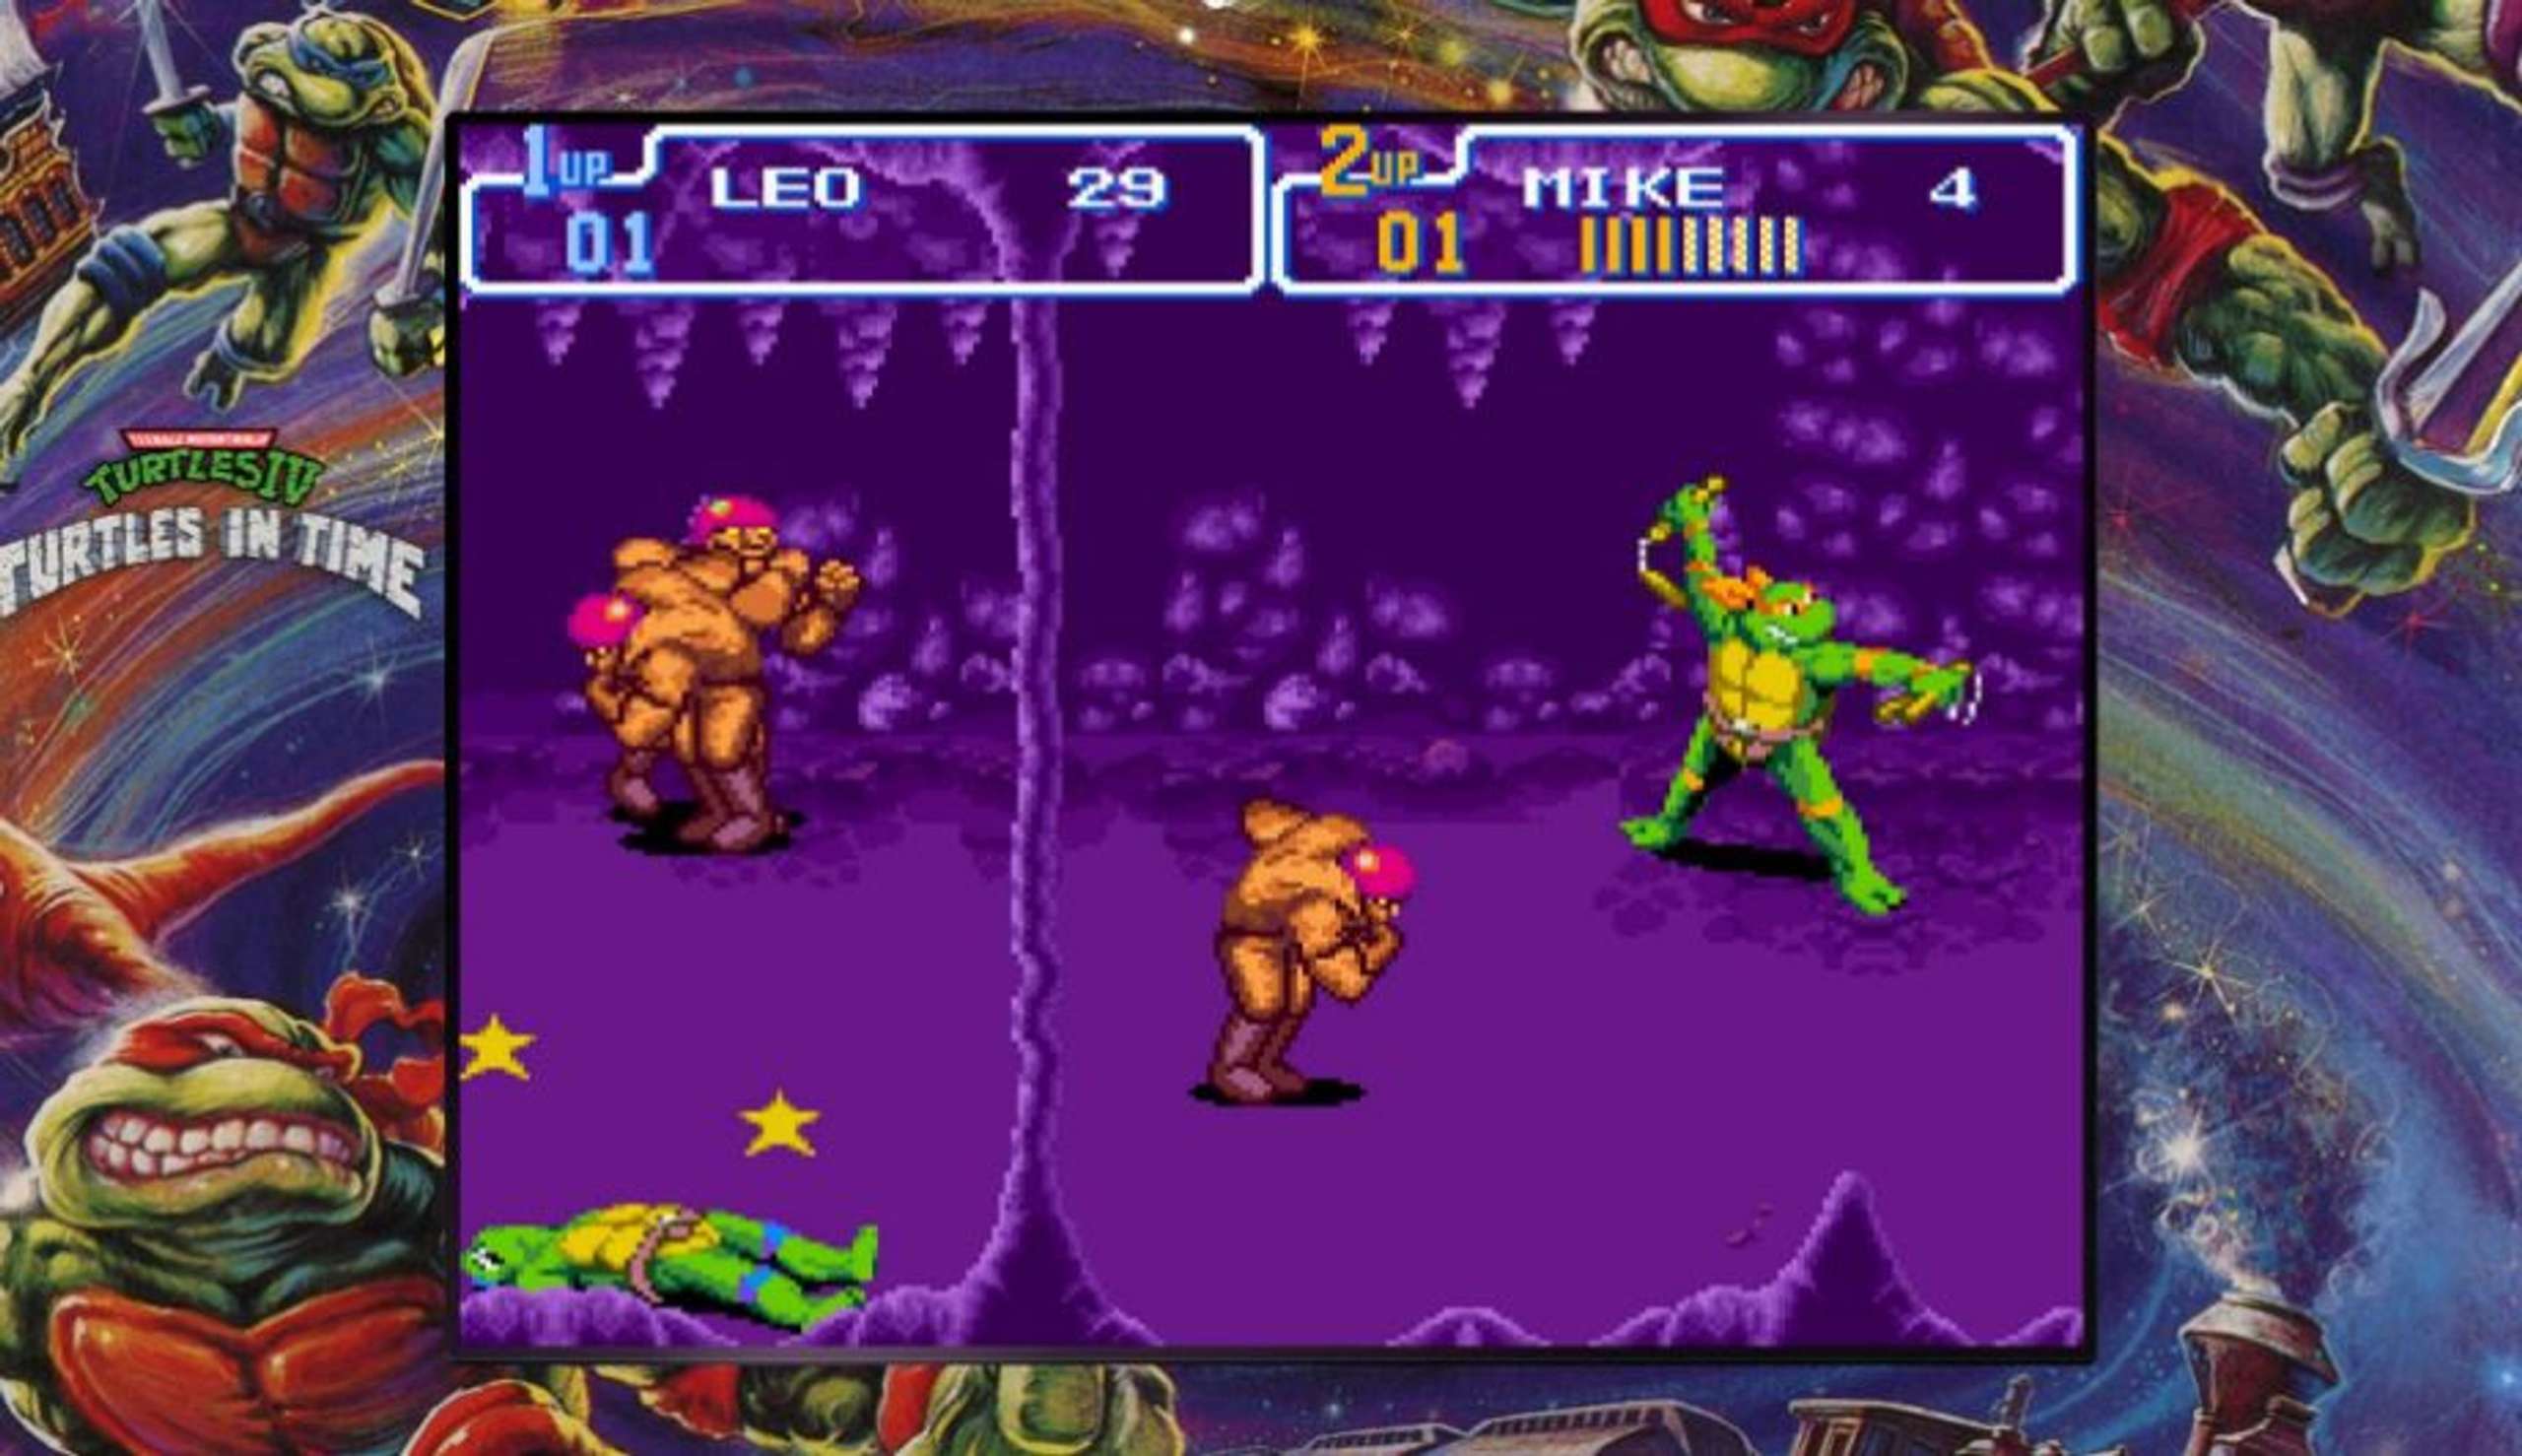 An Updated Trailer Has Been Posted Online For The Teenage Mutant Ninja Turtles: The Cowabunga Collection Reissue Collection For The PlayStation 5, Xbox Series X|S, PlayStation 4, Xbox One, And Nintendo Switch